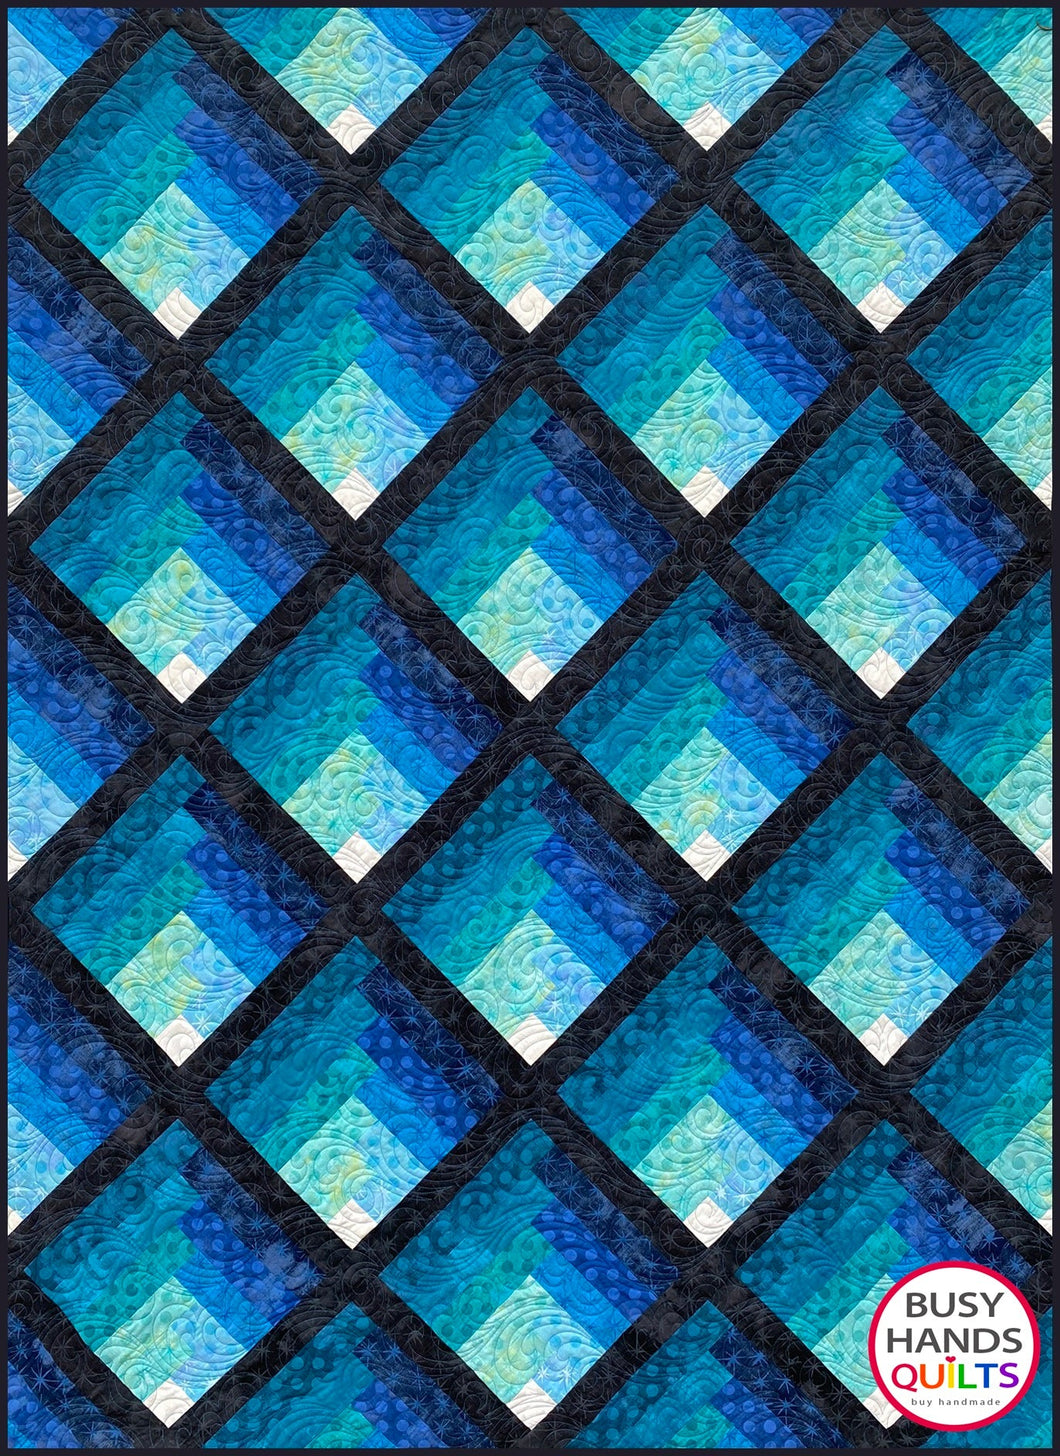 Download Waterfall Quilt Pattern Pdf Busy Hands Quilts